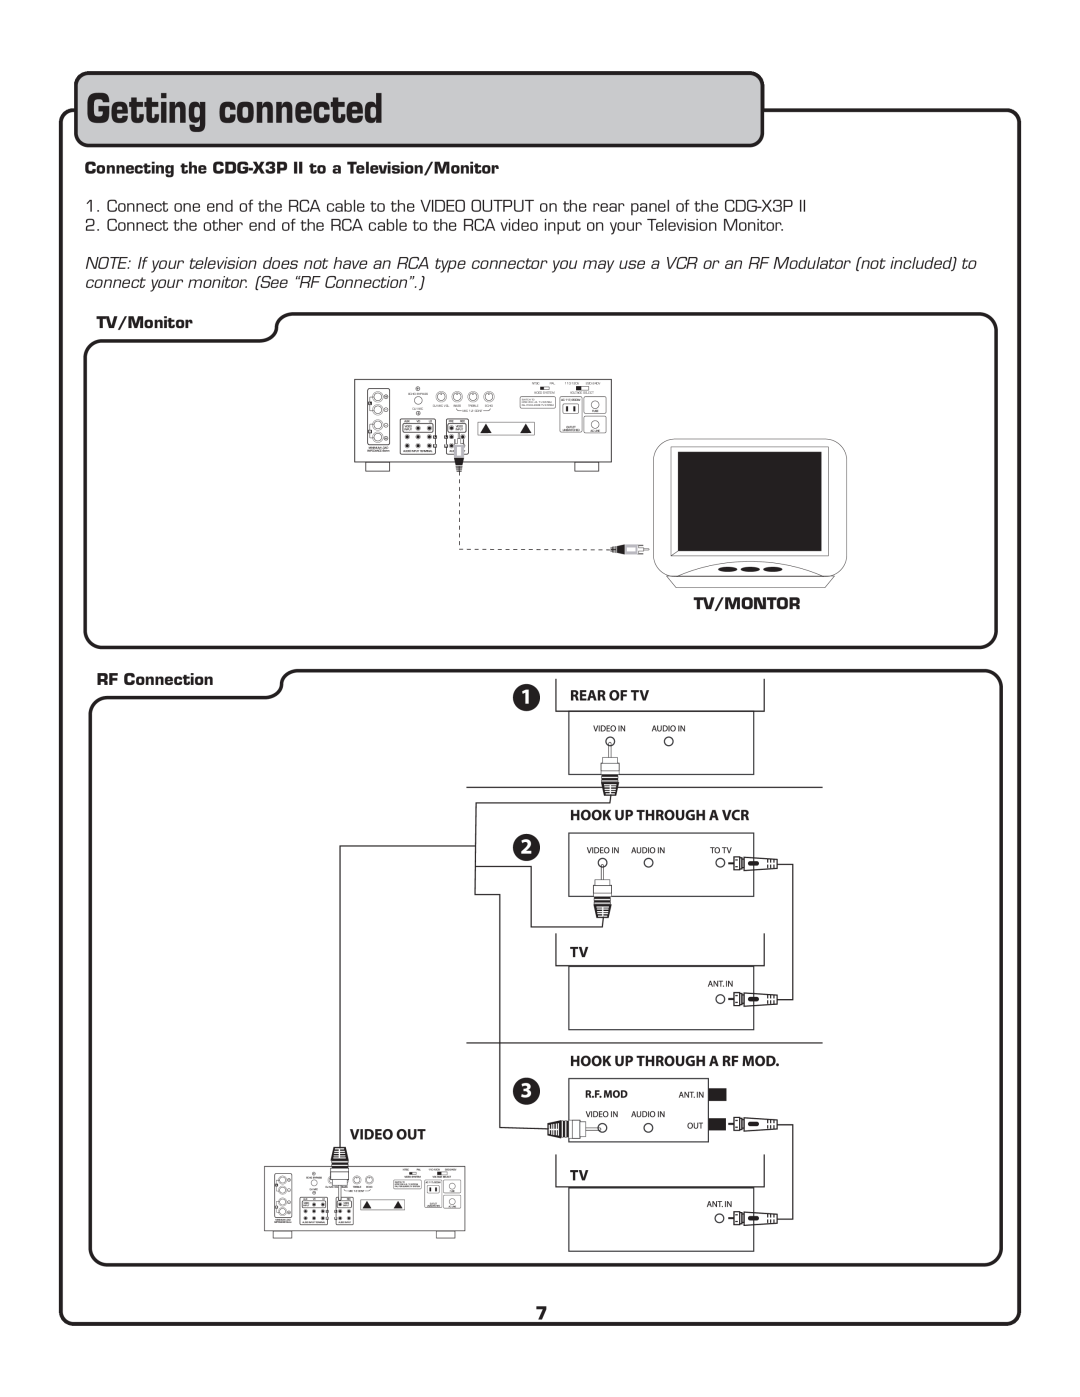 VocoPro CDG-X3P II owner manual Getting connected, Connecting the CDG-X3PII to a Television/Monitor, TV/Monitor 